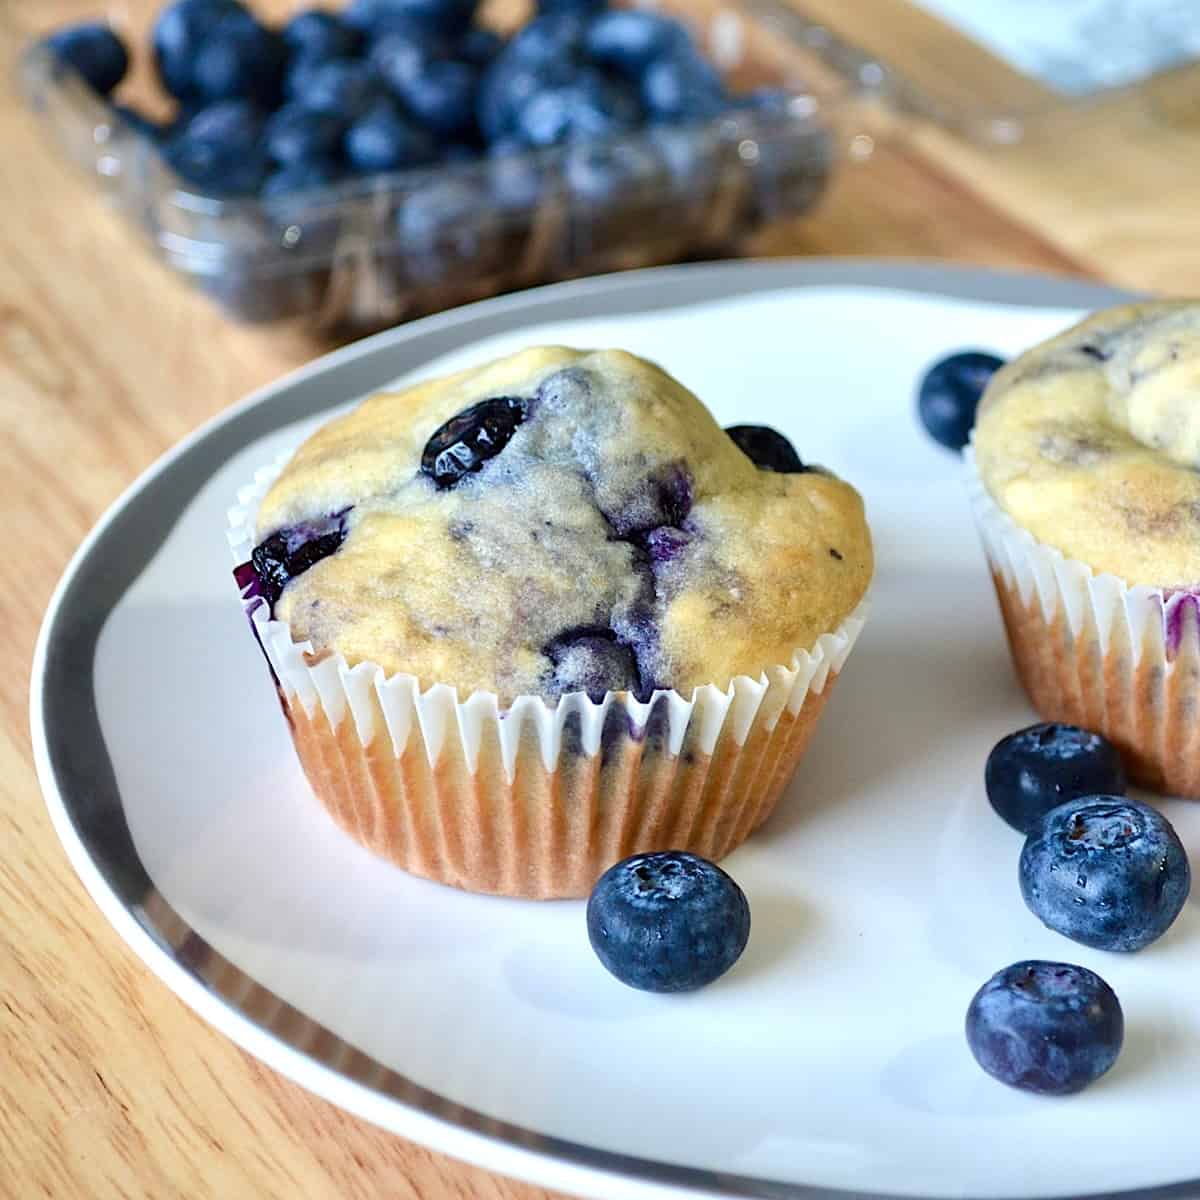 Blueberry muffins with carton of blueberries